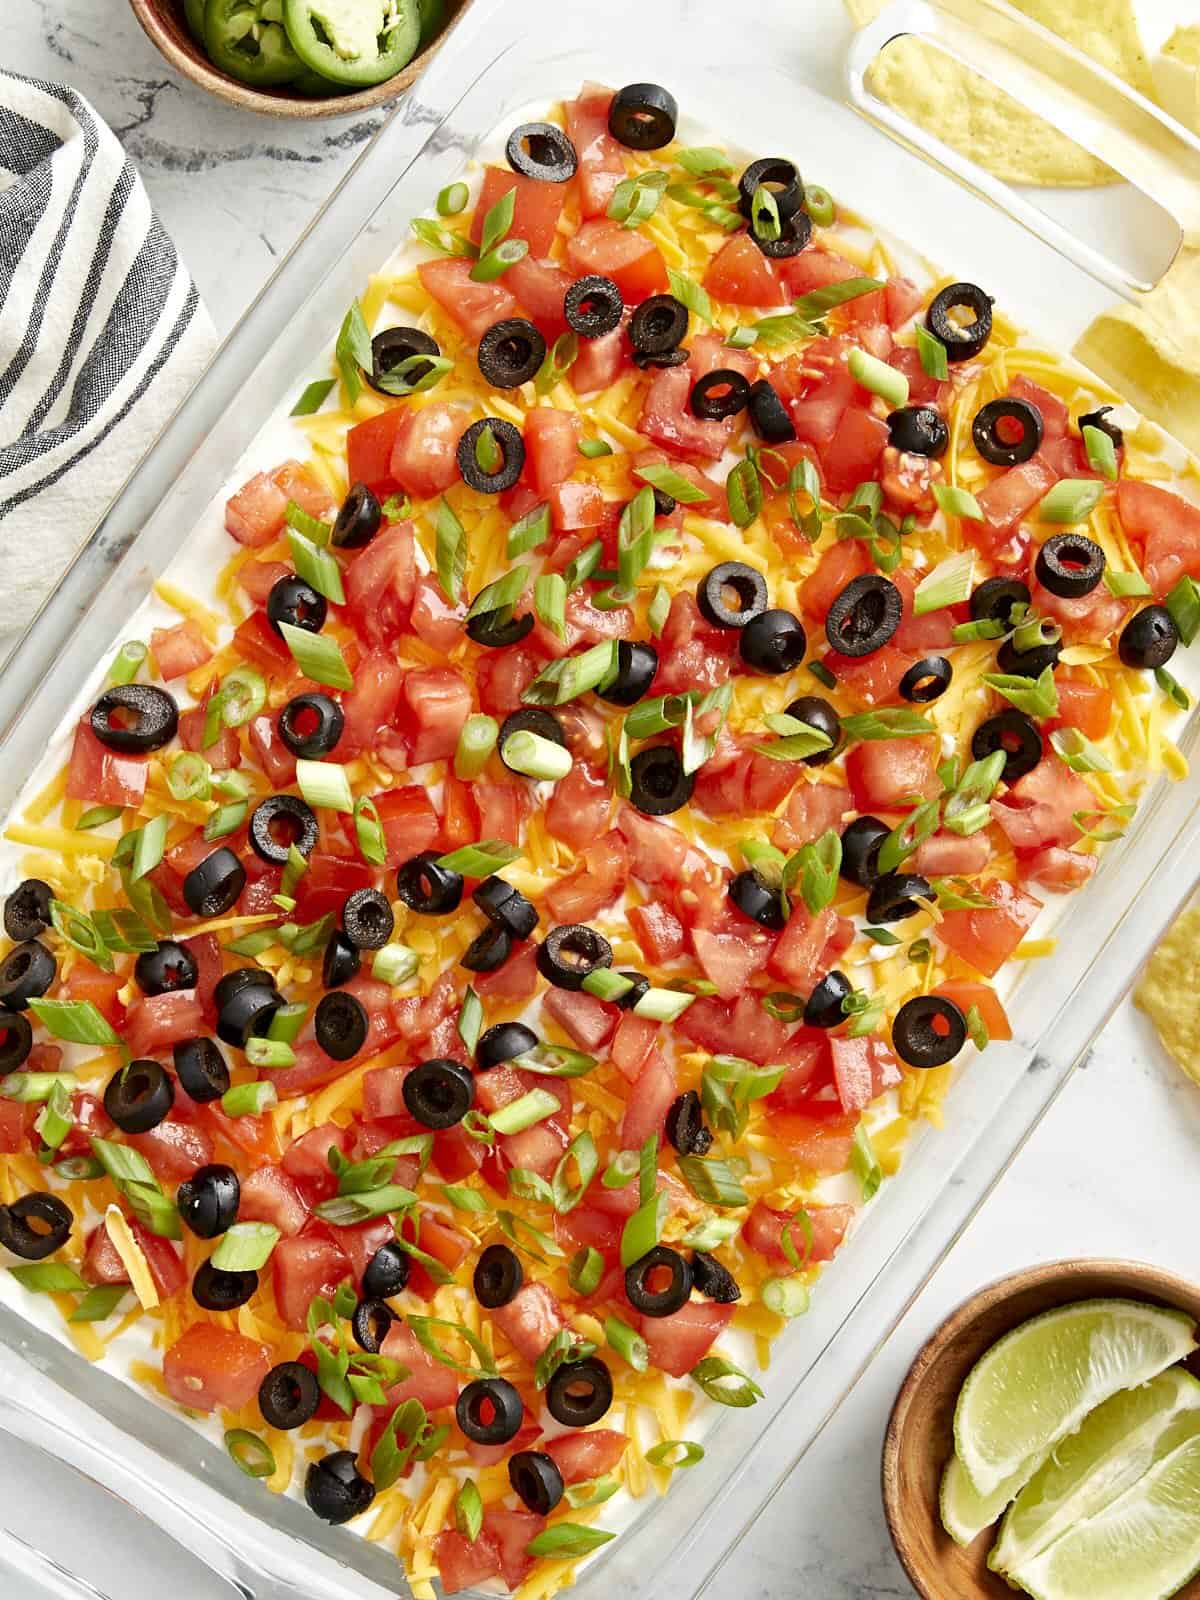 Overhead view of 7 layer dip in a glass casserole dish with a napkin, chips, and lime wedges on the side.